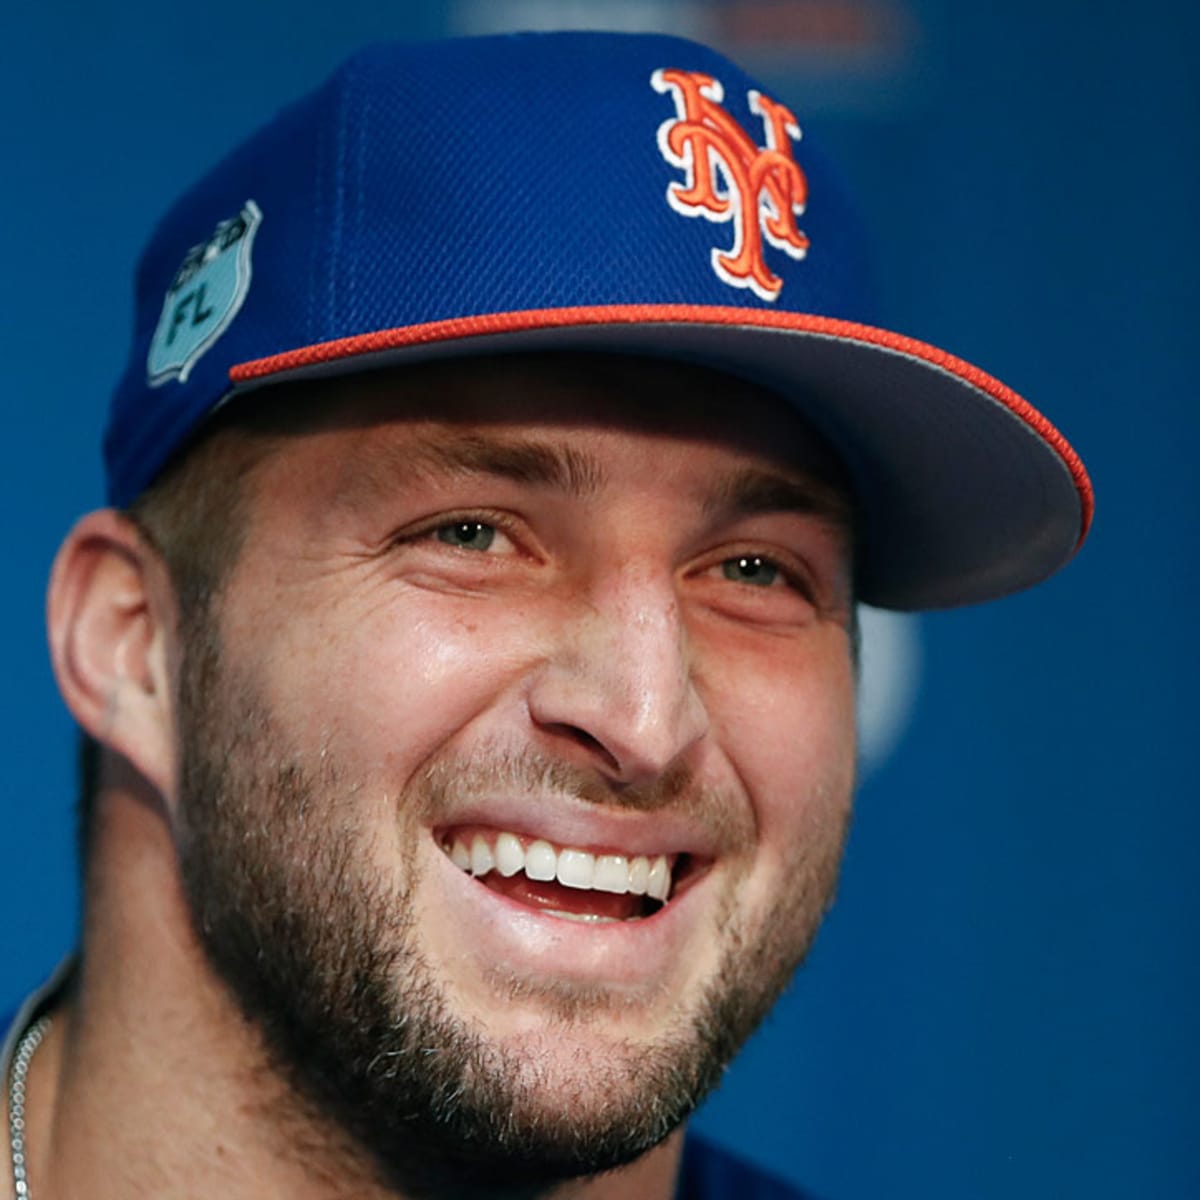 Tim Tebow says baseball's no stunt, even with jerseys and books to